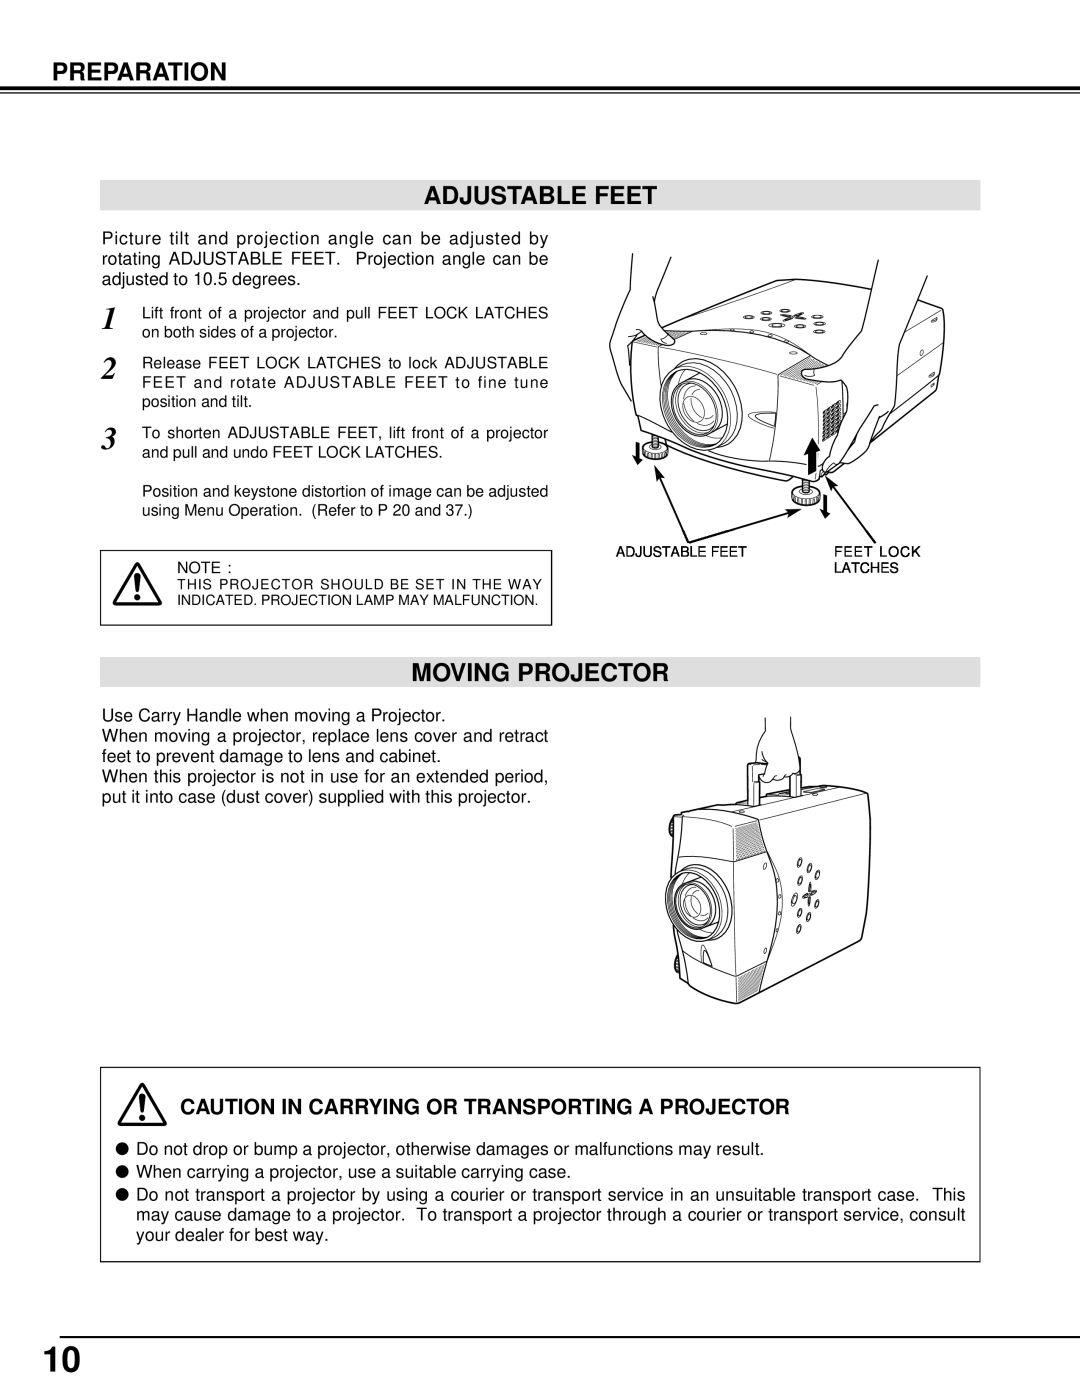 Sanyo PLV-70 owner manual Preparation Adjustable Feet, Moving Projector, Caution In Carrying Or Transporting A Projector 